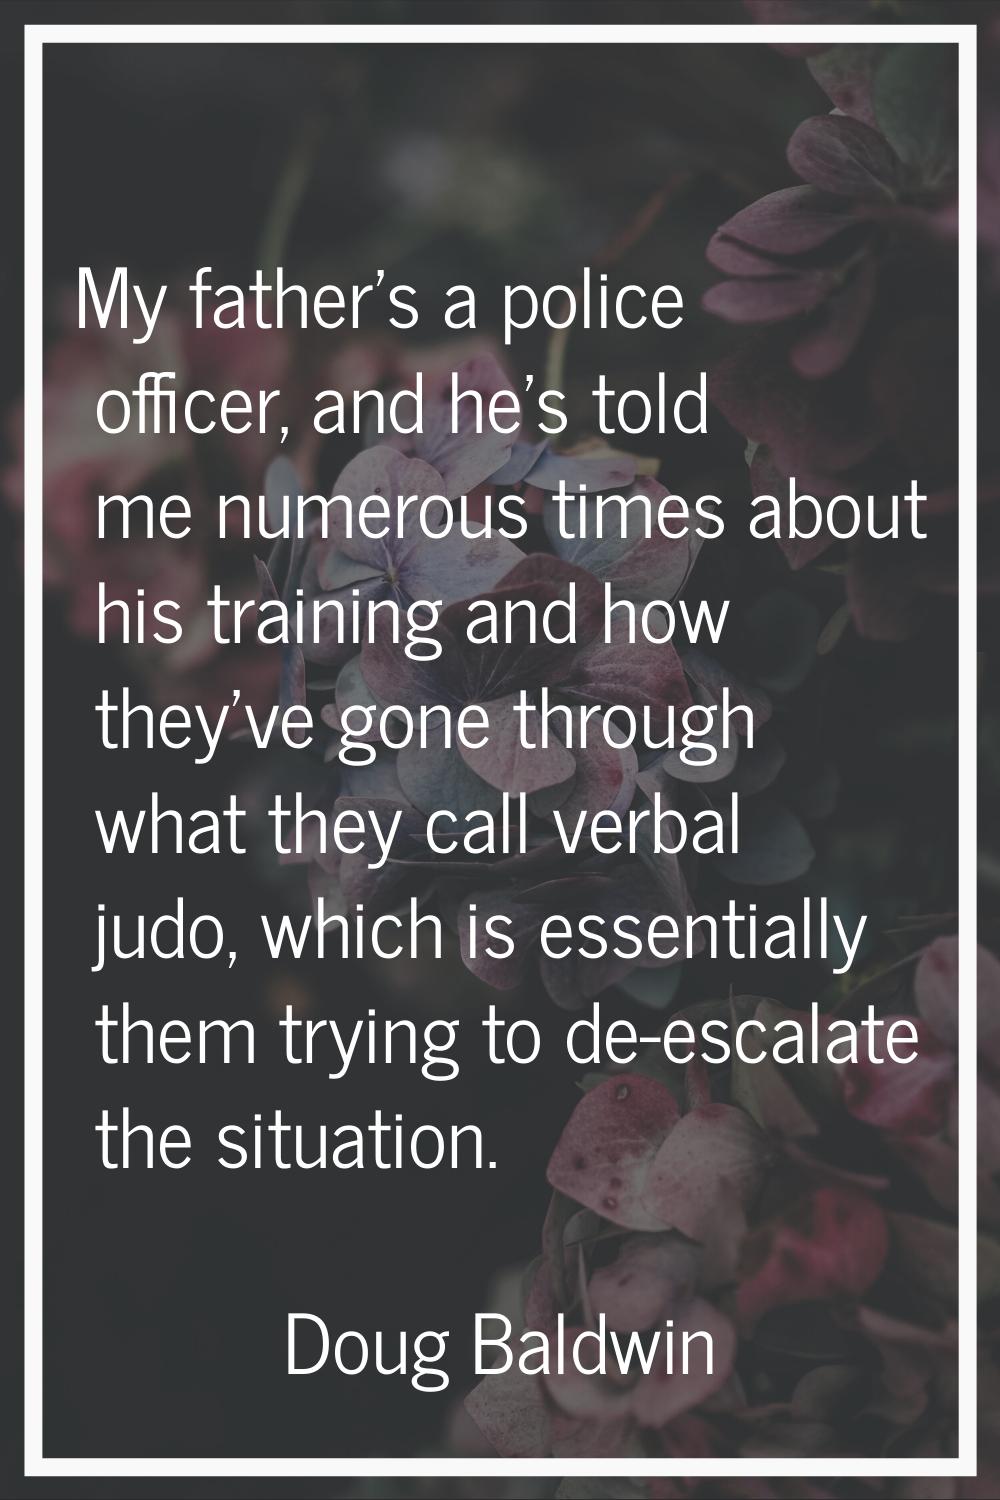 My father's a police officer, and he's told me numerous times about his training and how they've go